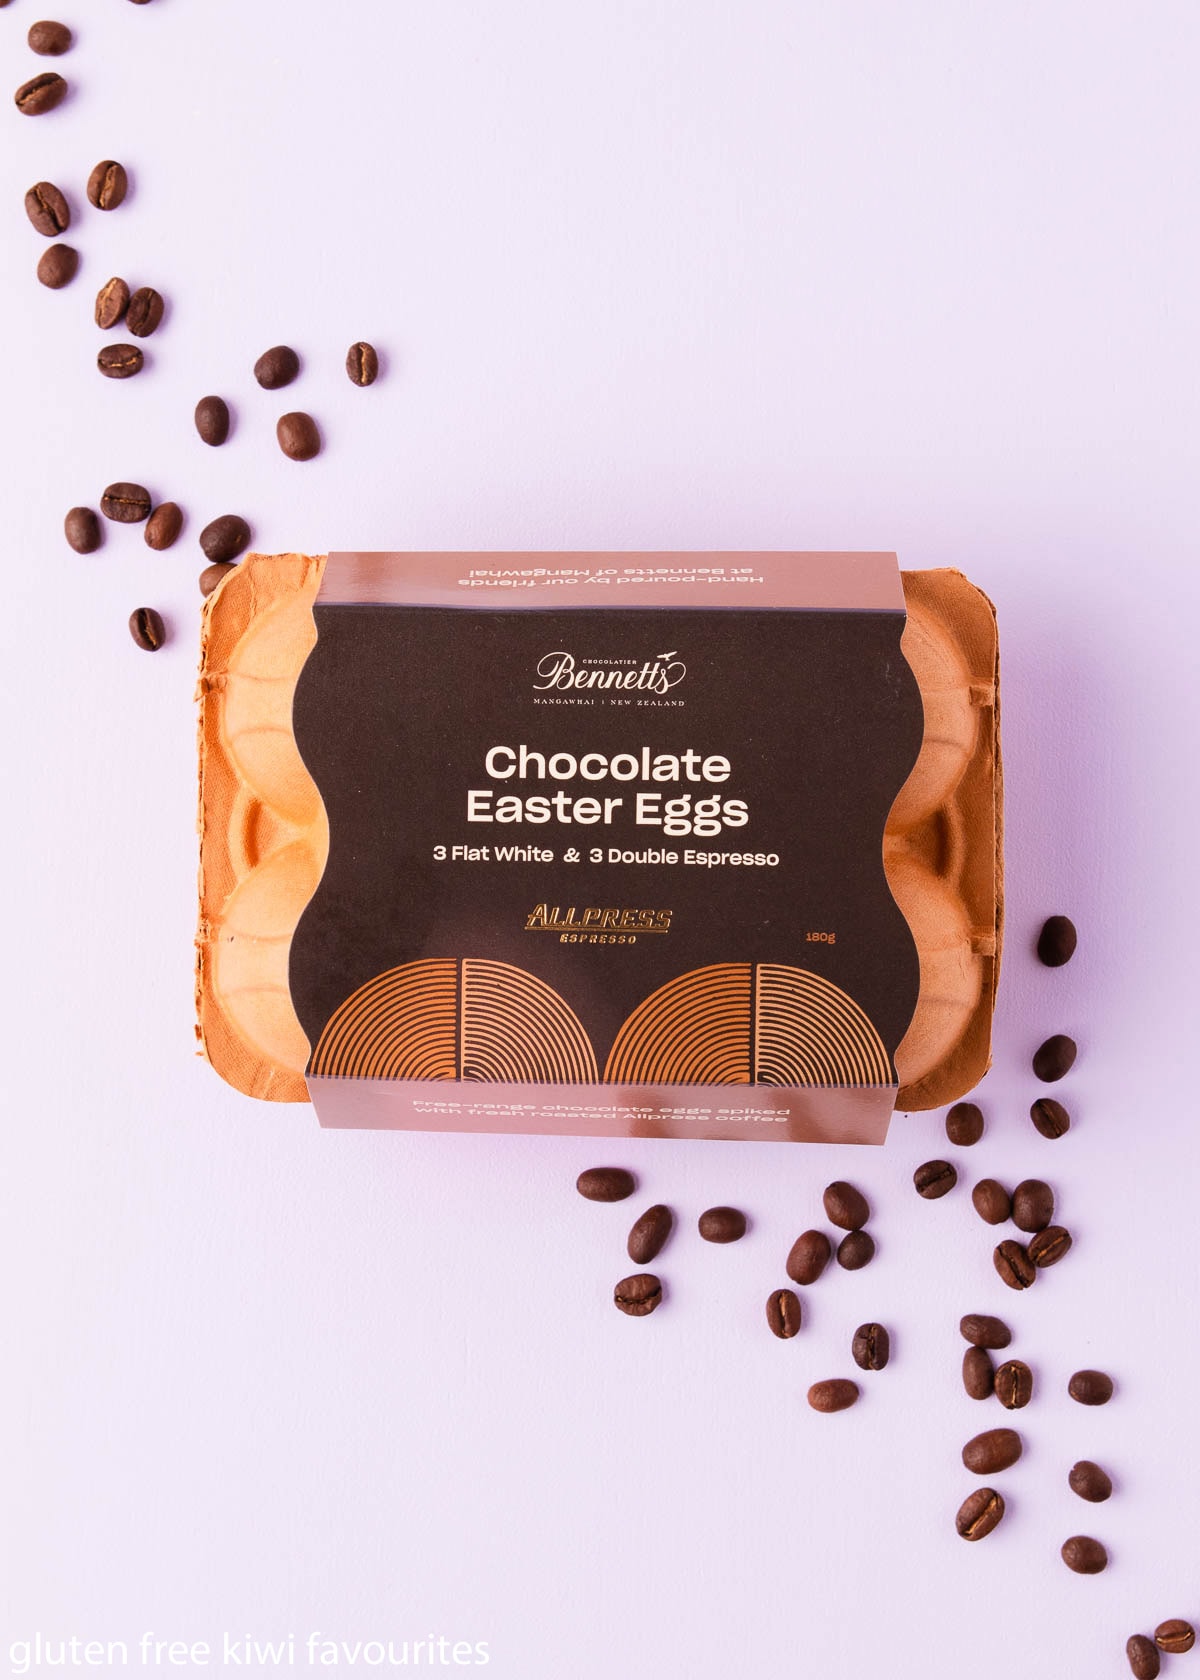 Allpress Espresso chocolate eggs by Bennetts of Mangawhai in a brown egg carton on a light purple background.